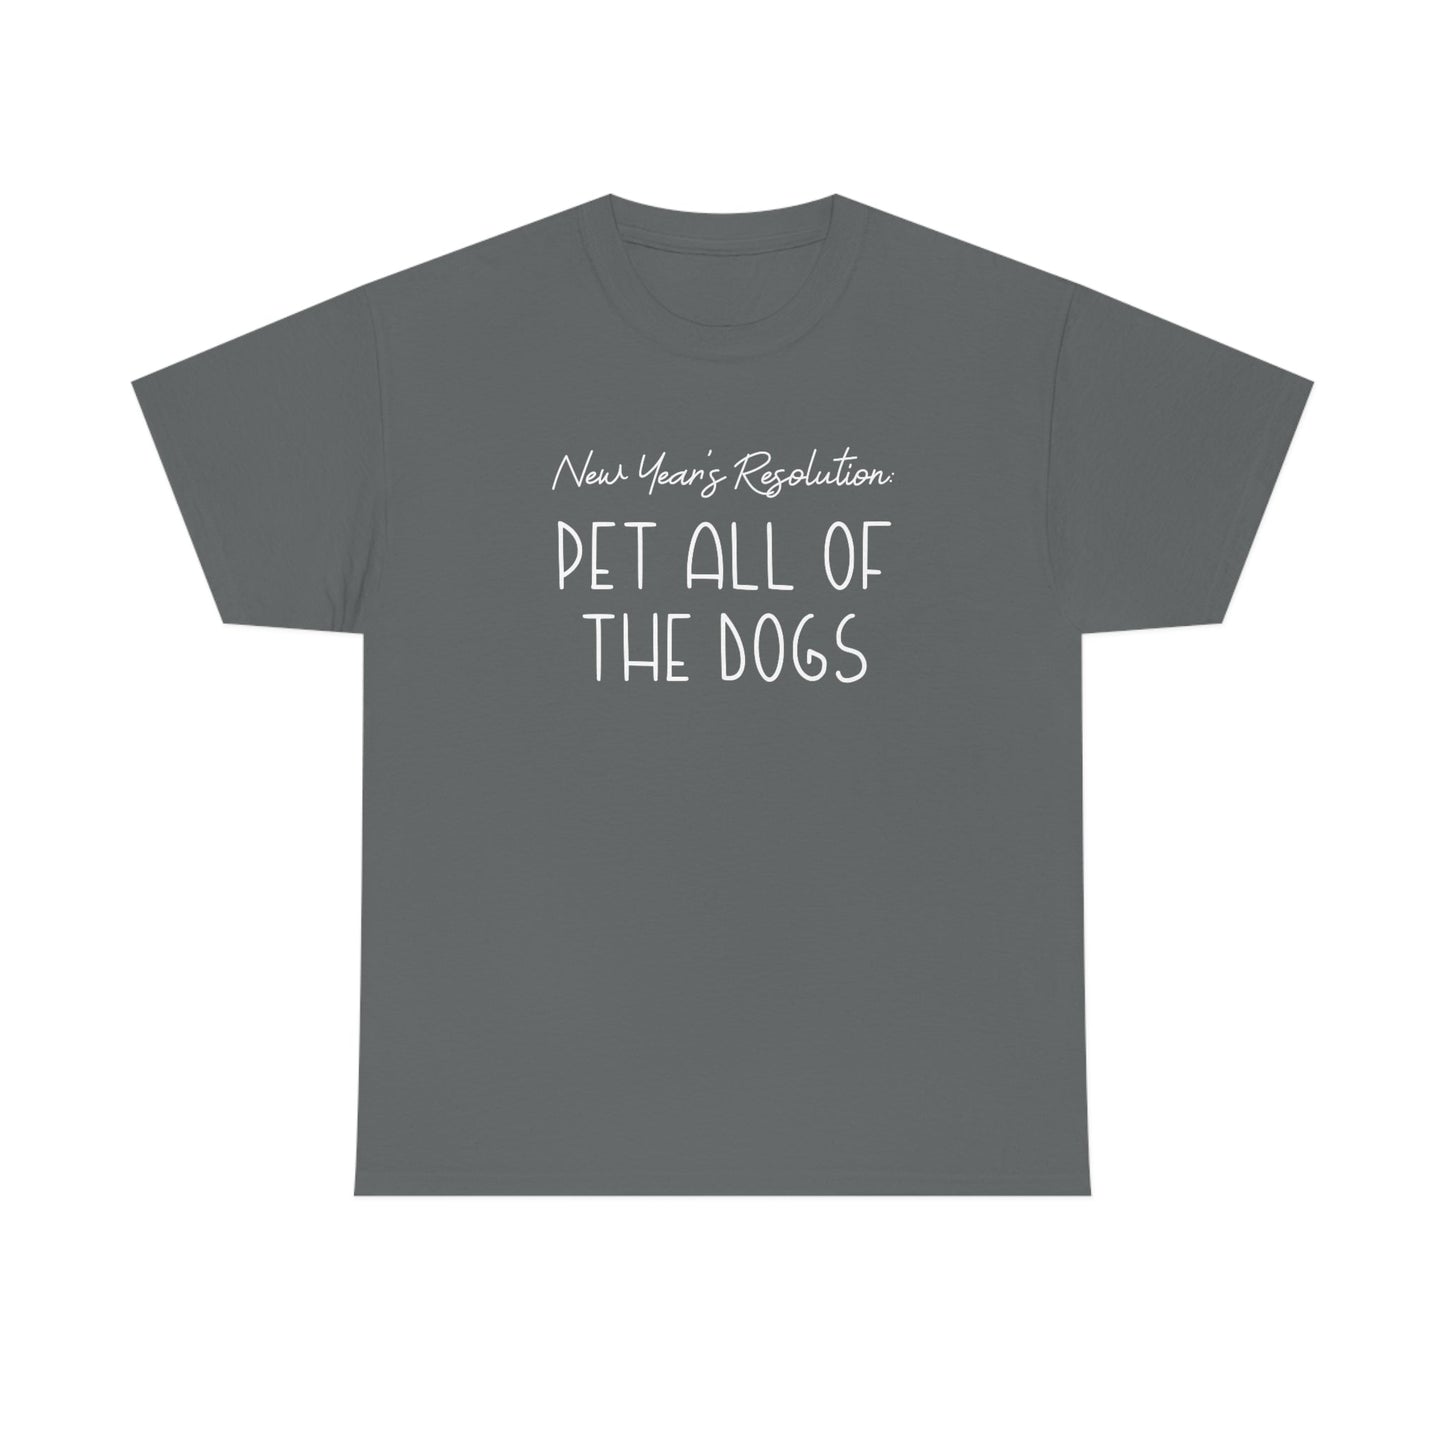 New Year's Resolution: Pet All Of The Dogs | Text Tees - Detezi Designs-41457048359703797416